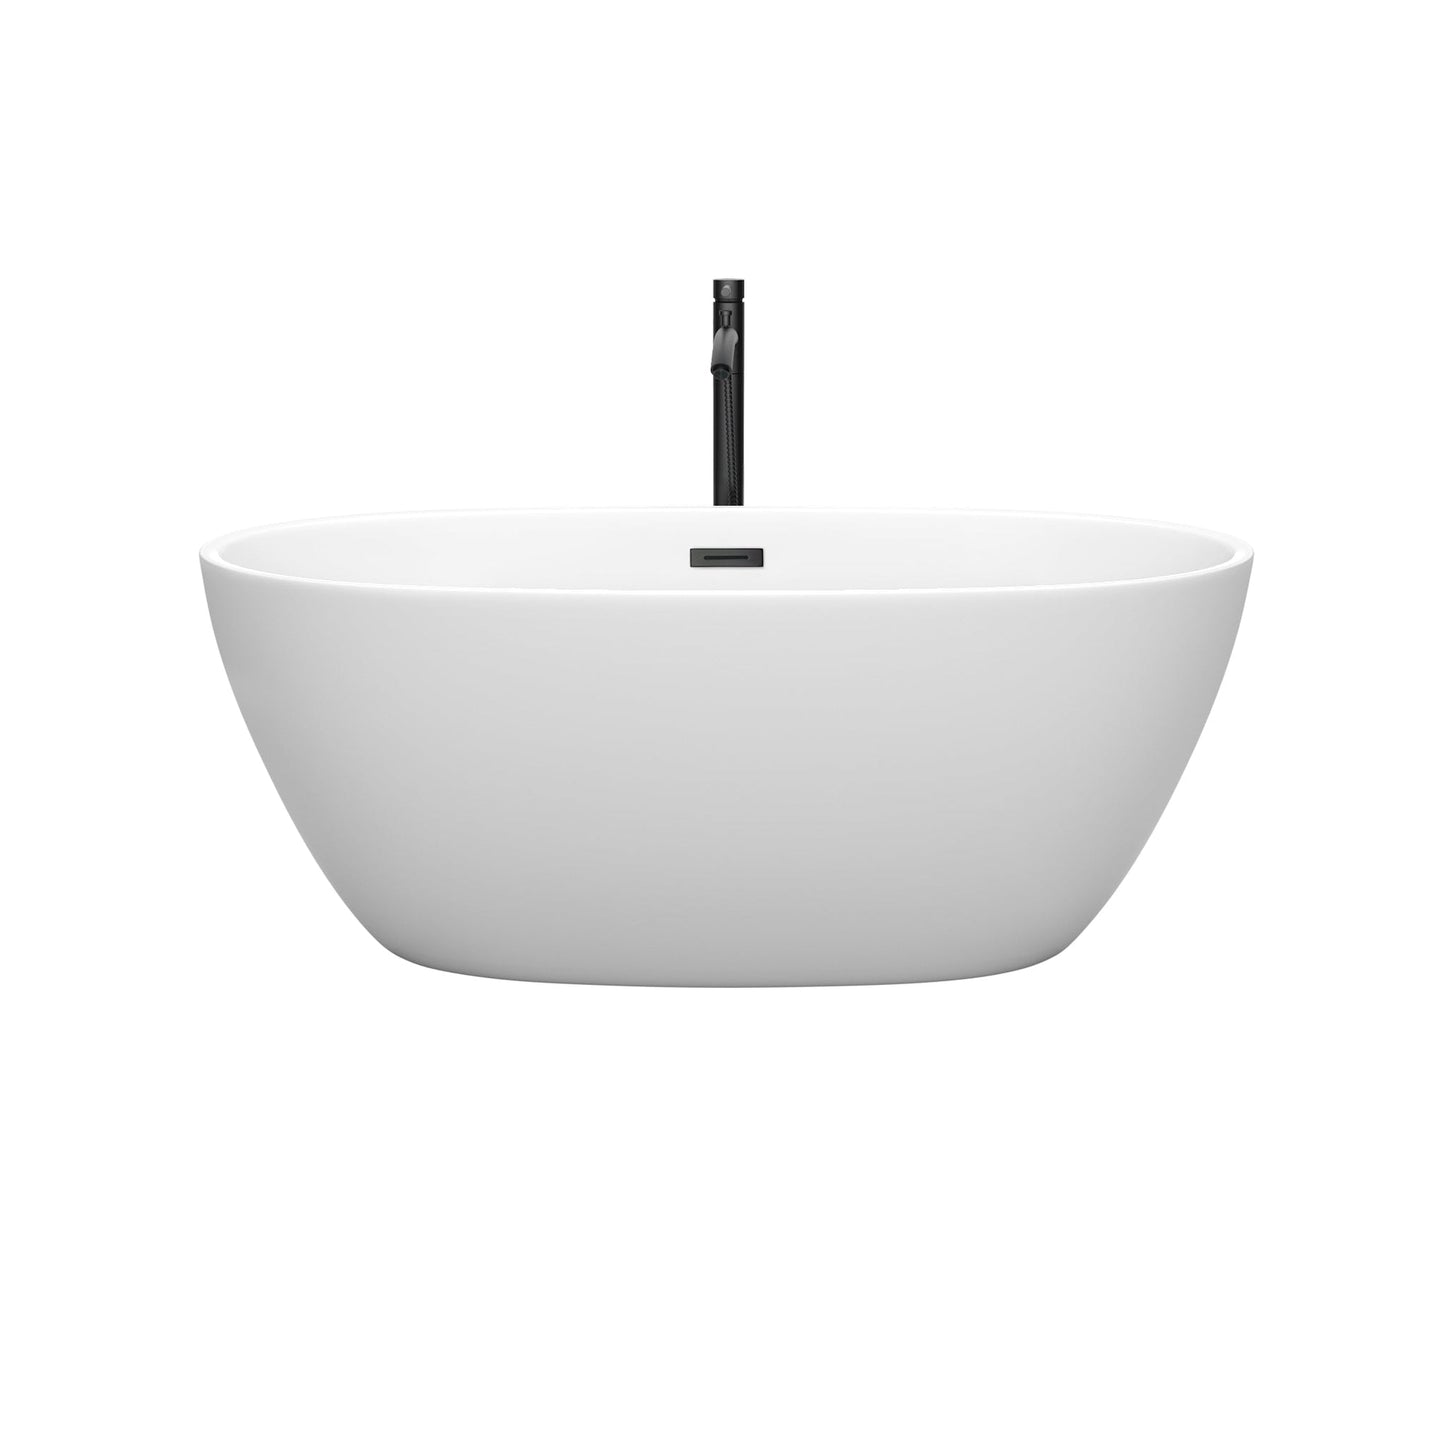 Wyndham Collection Juno 59" Freestanding Bathtub in Matte White With Floor Mounted Faucet, Drain and Overflow Trim in Matte Black